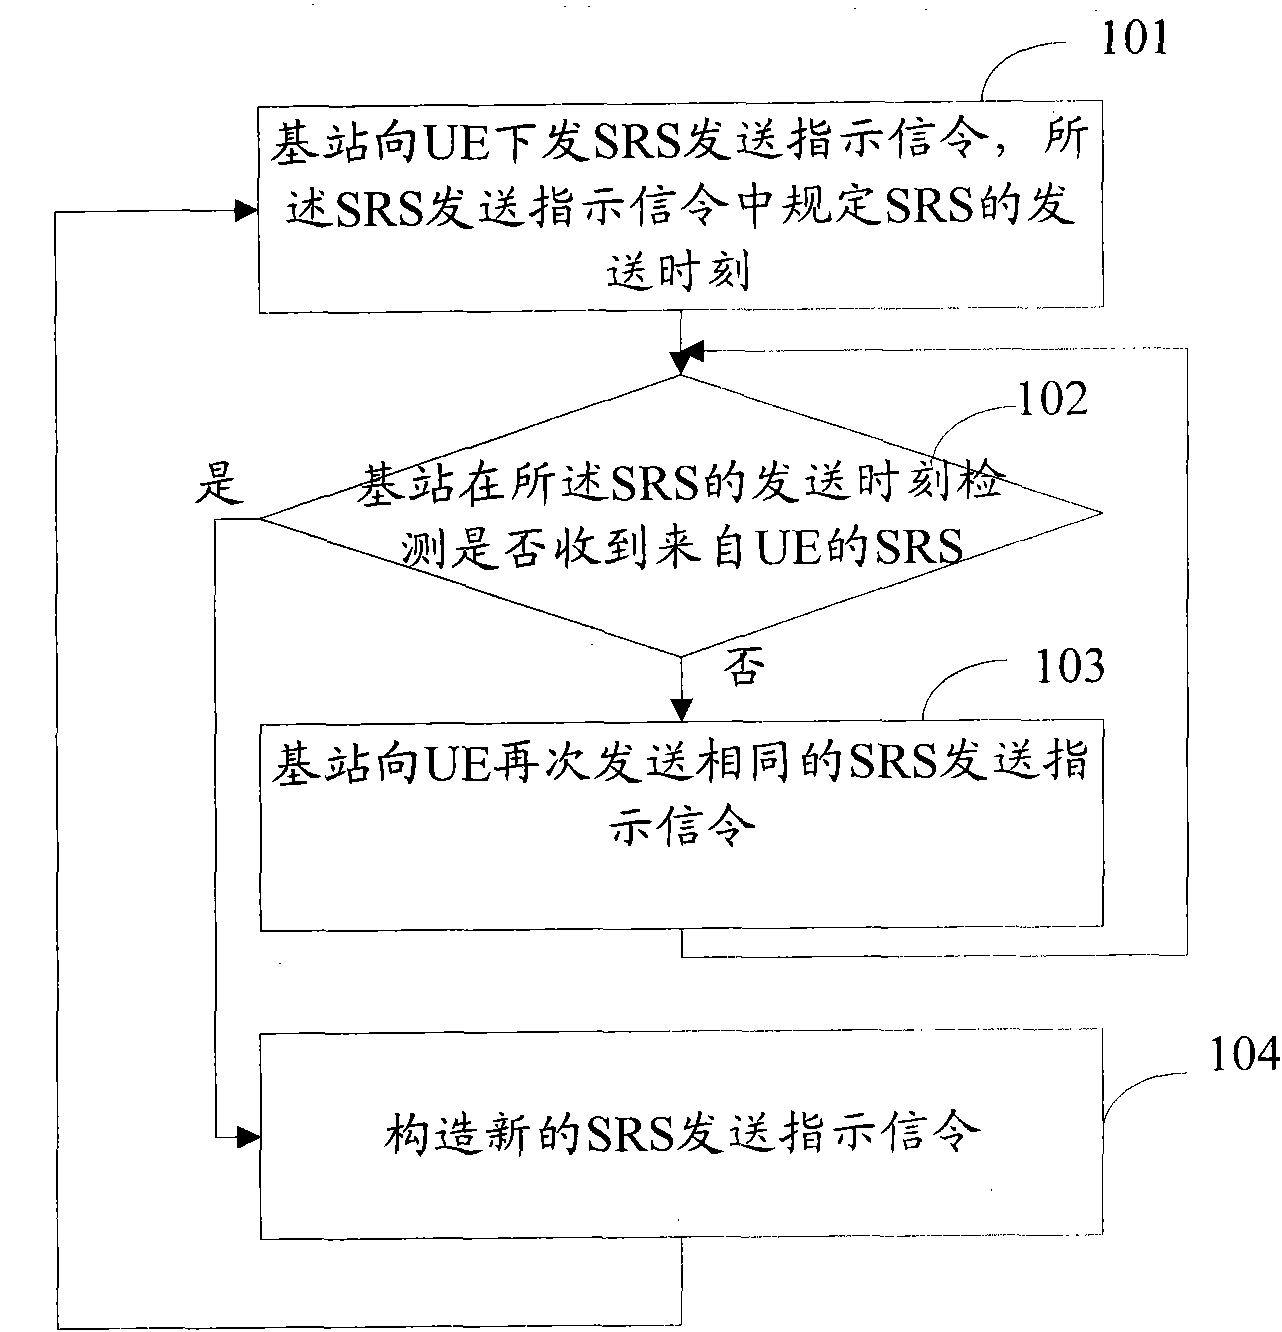 Method and system for carrying out non-periodic scheduling through physical downlink control channel (PDCCH)